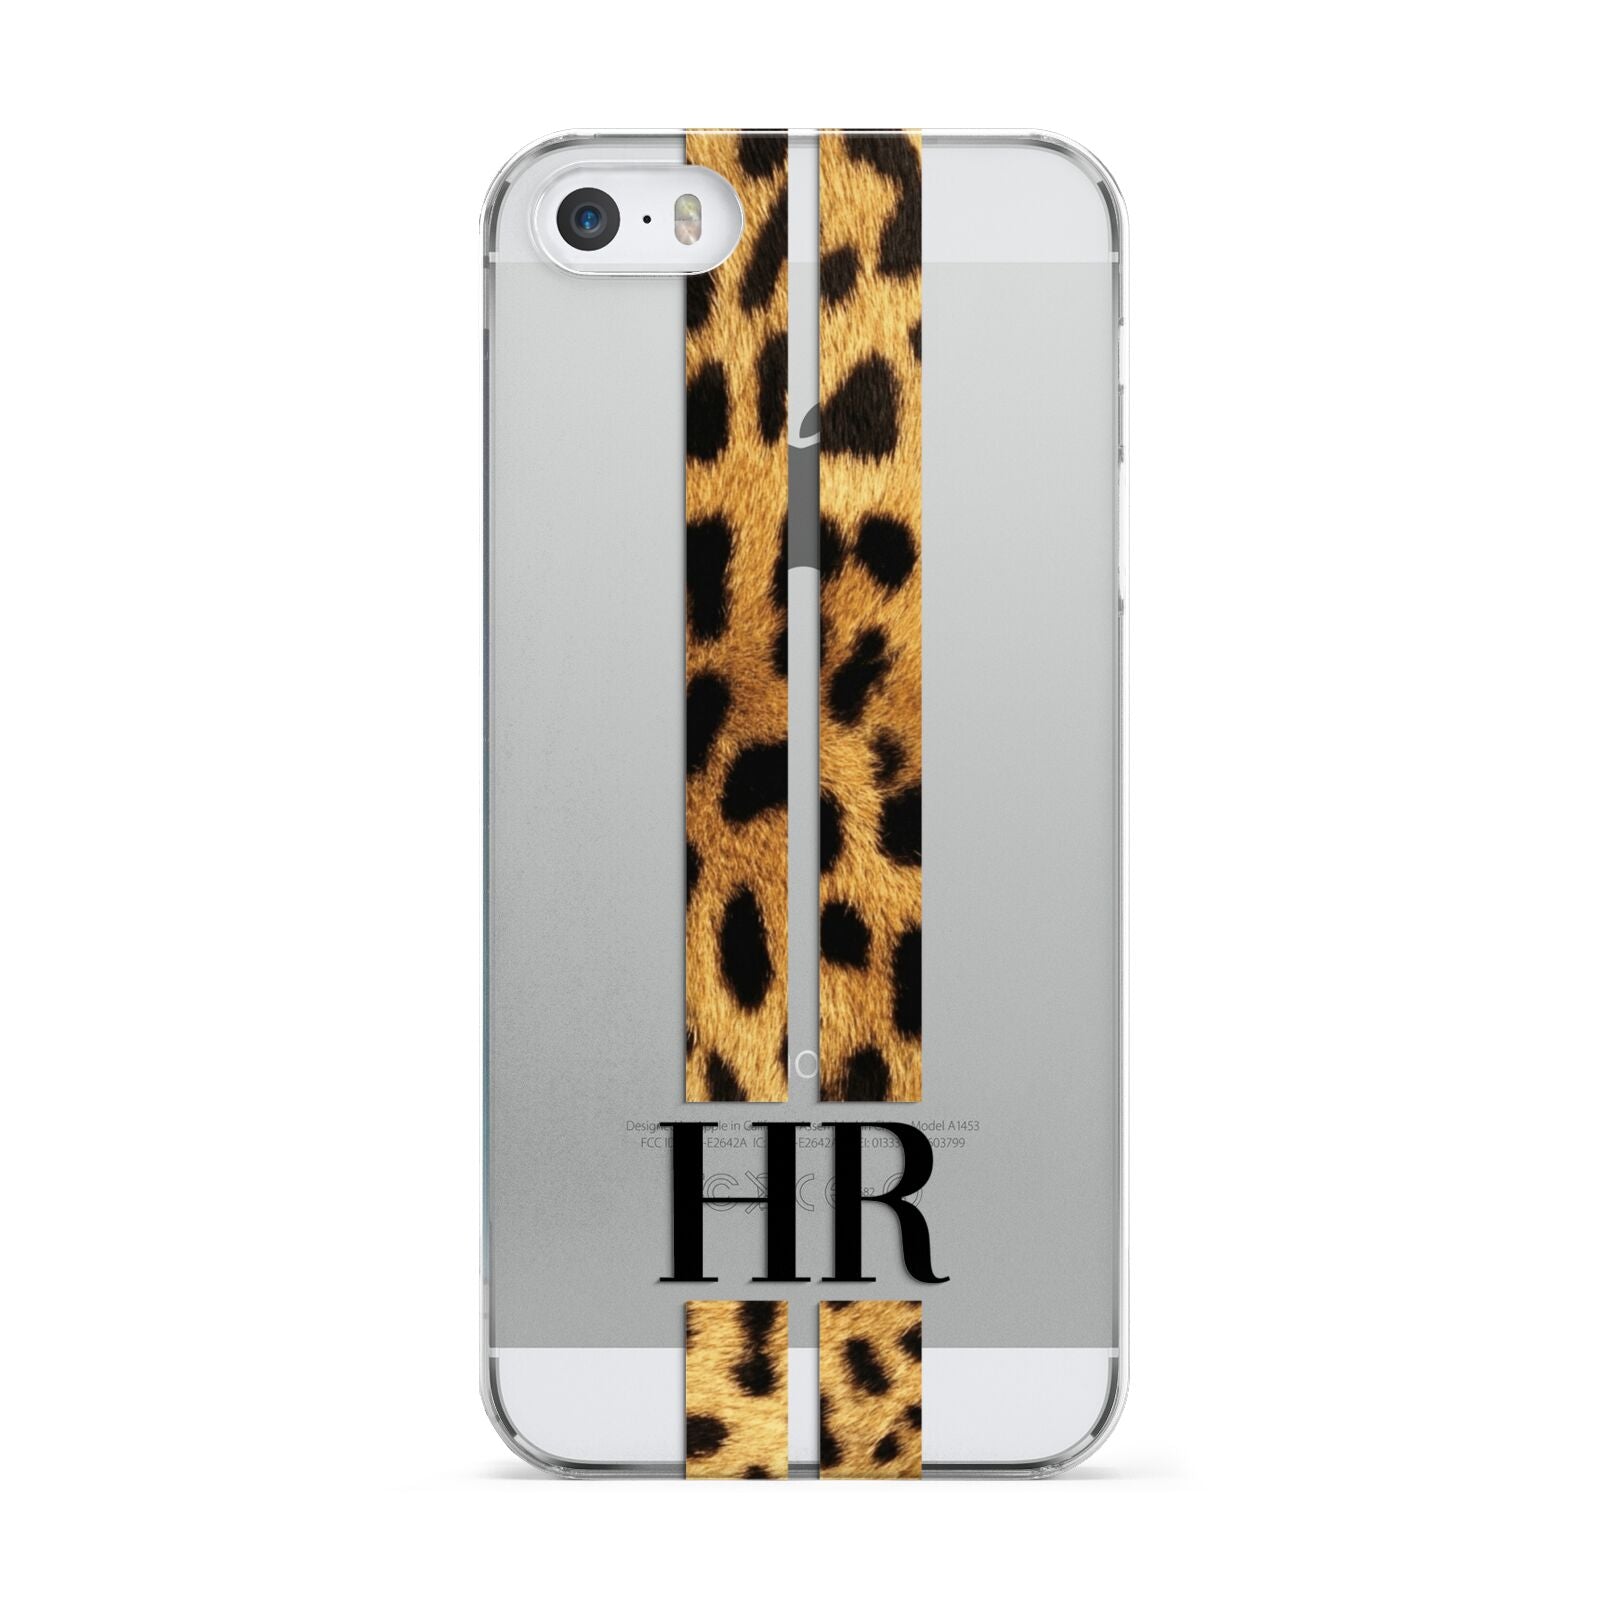 Initialled Leopard Print Stripes Apple iPhone 5 Case